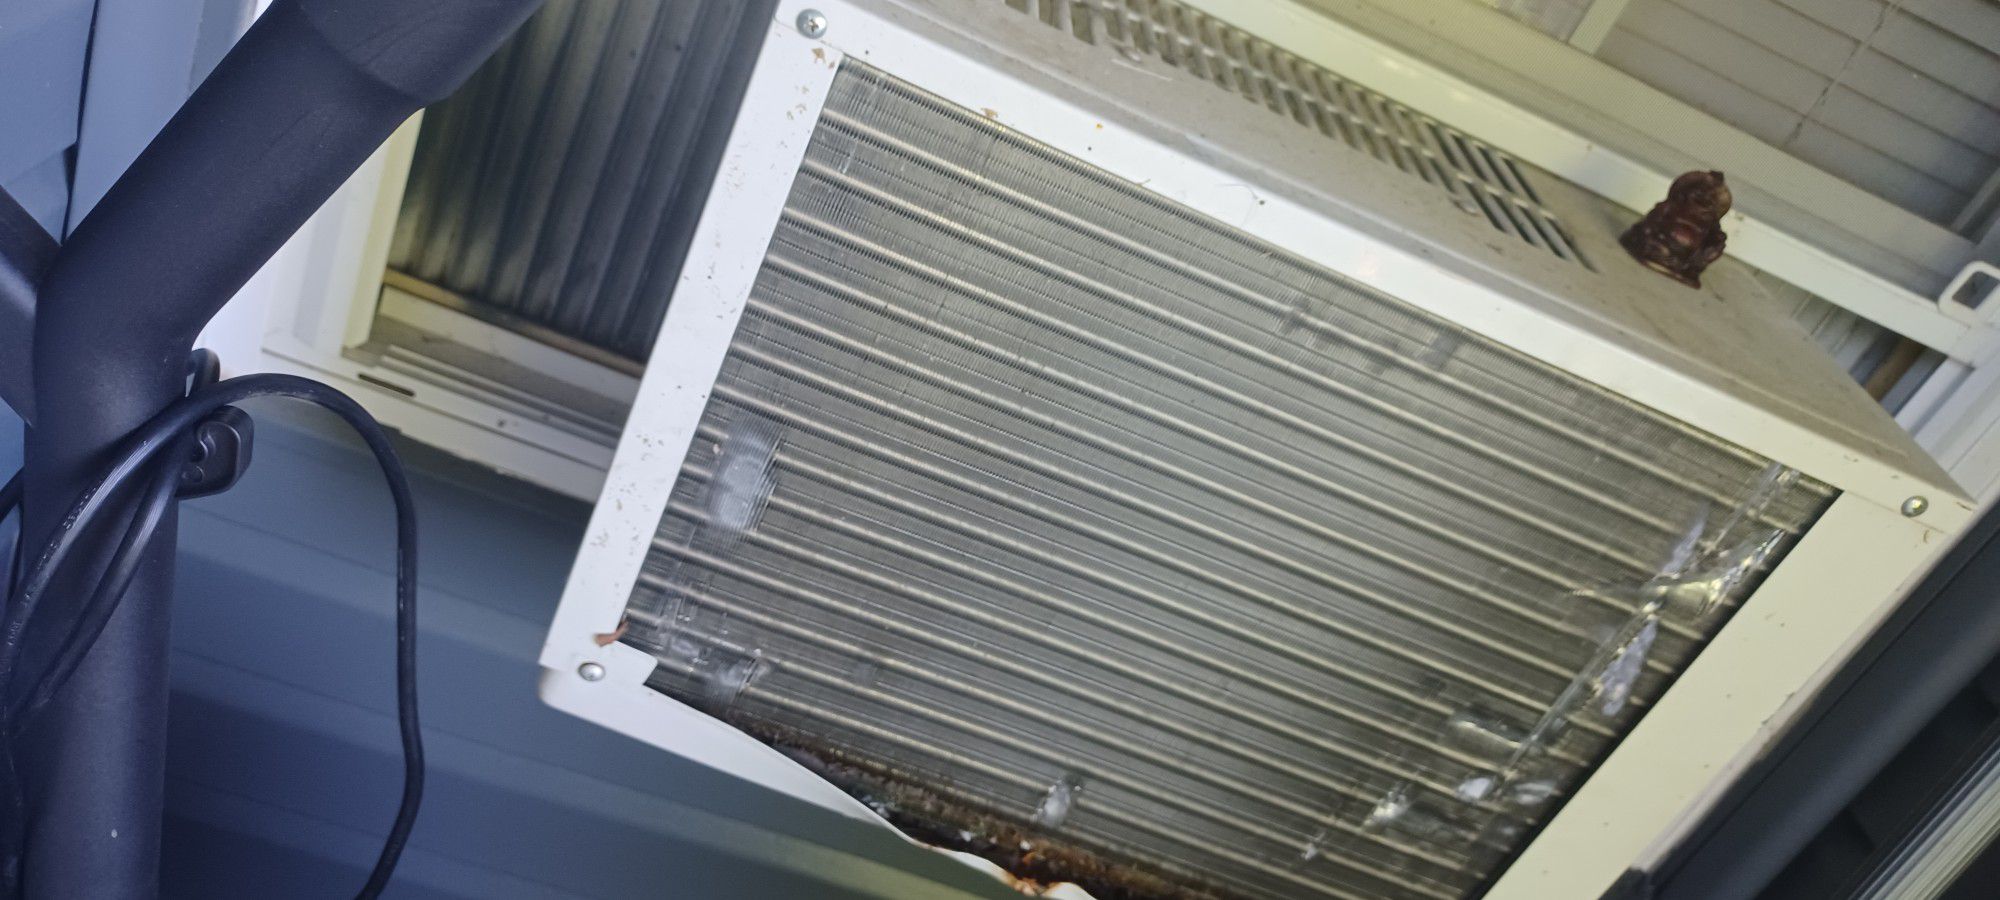 8000 BTUS Used GTE Used Airconditioner